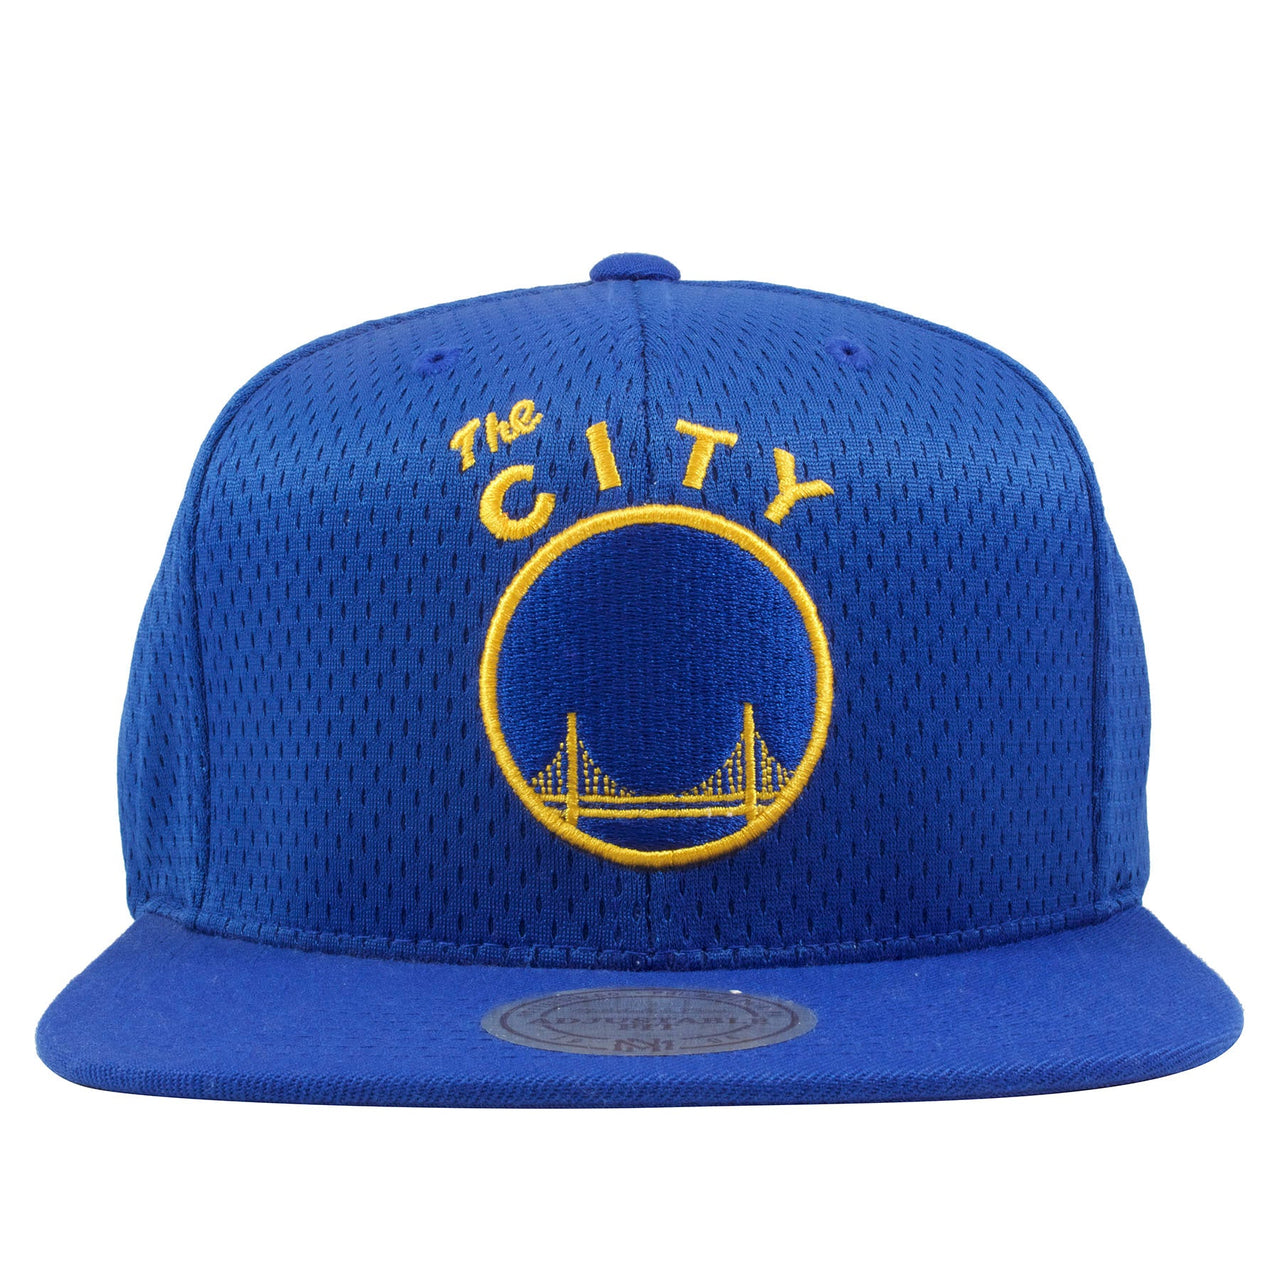 Golden State Warriors Royal Blue Mesh Mitchell and Ness Snapback Hat